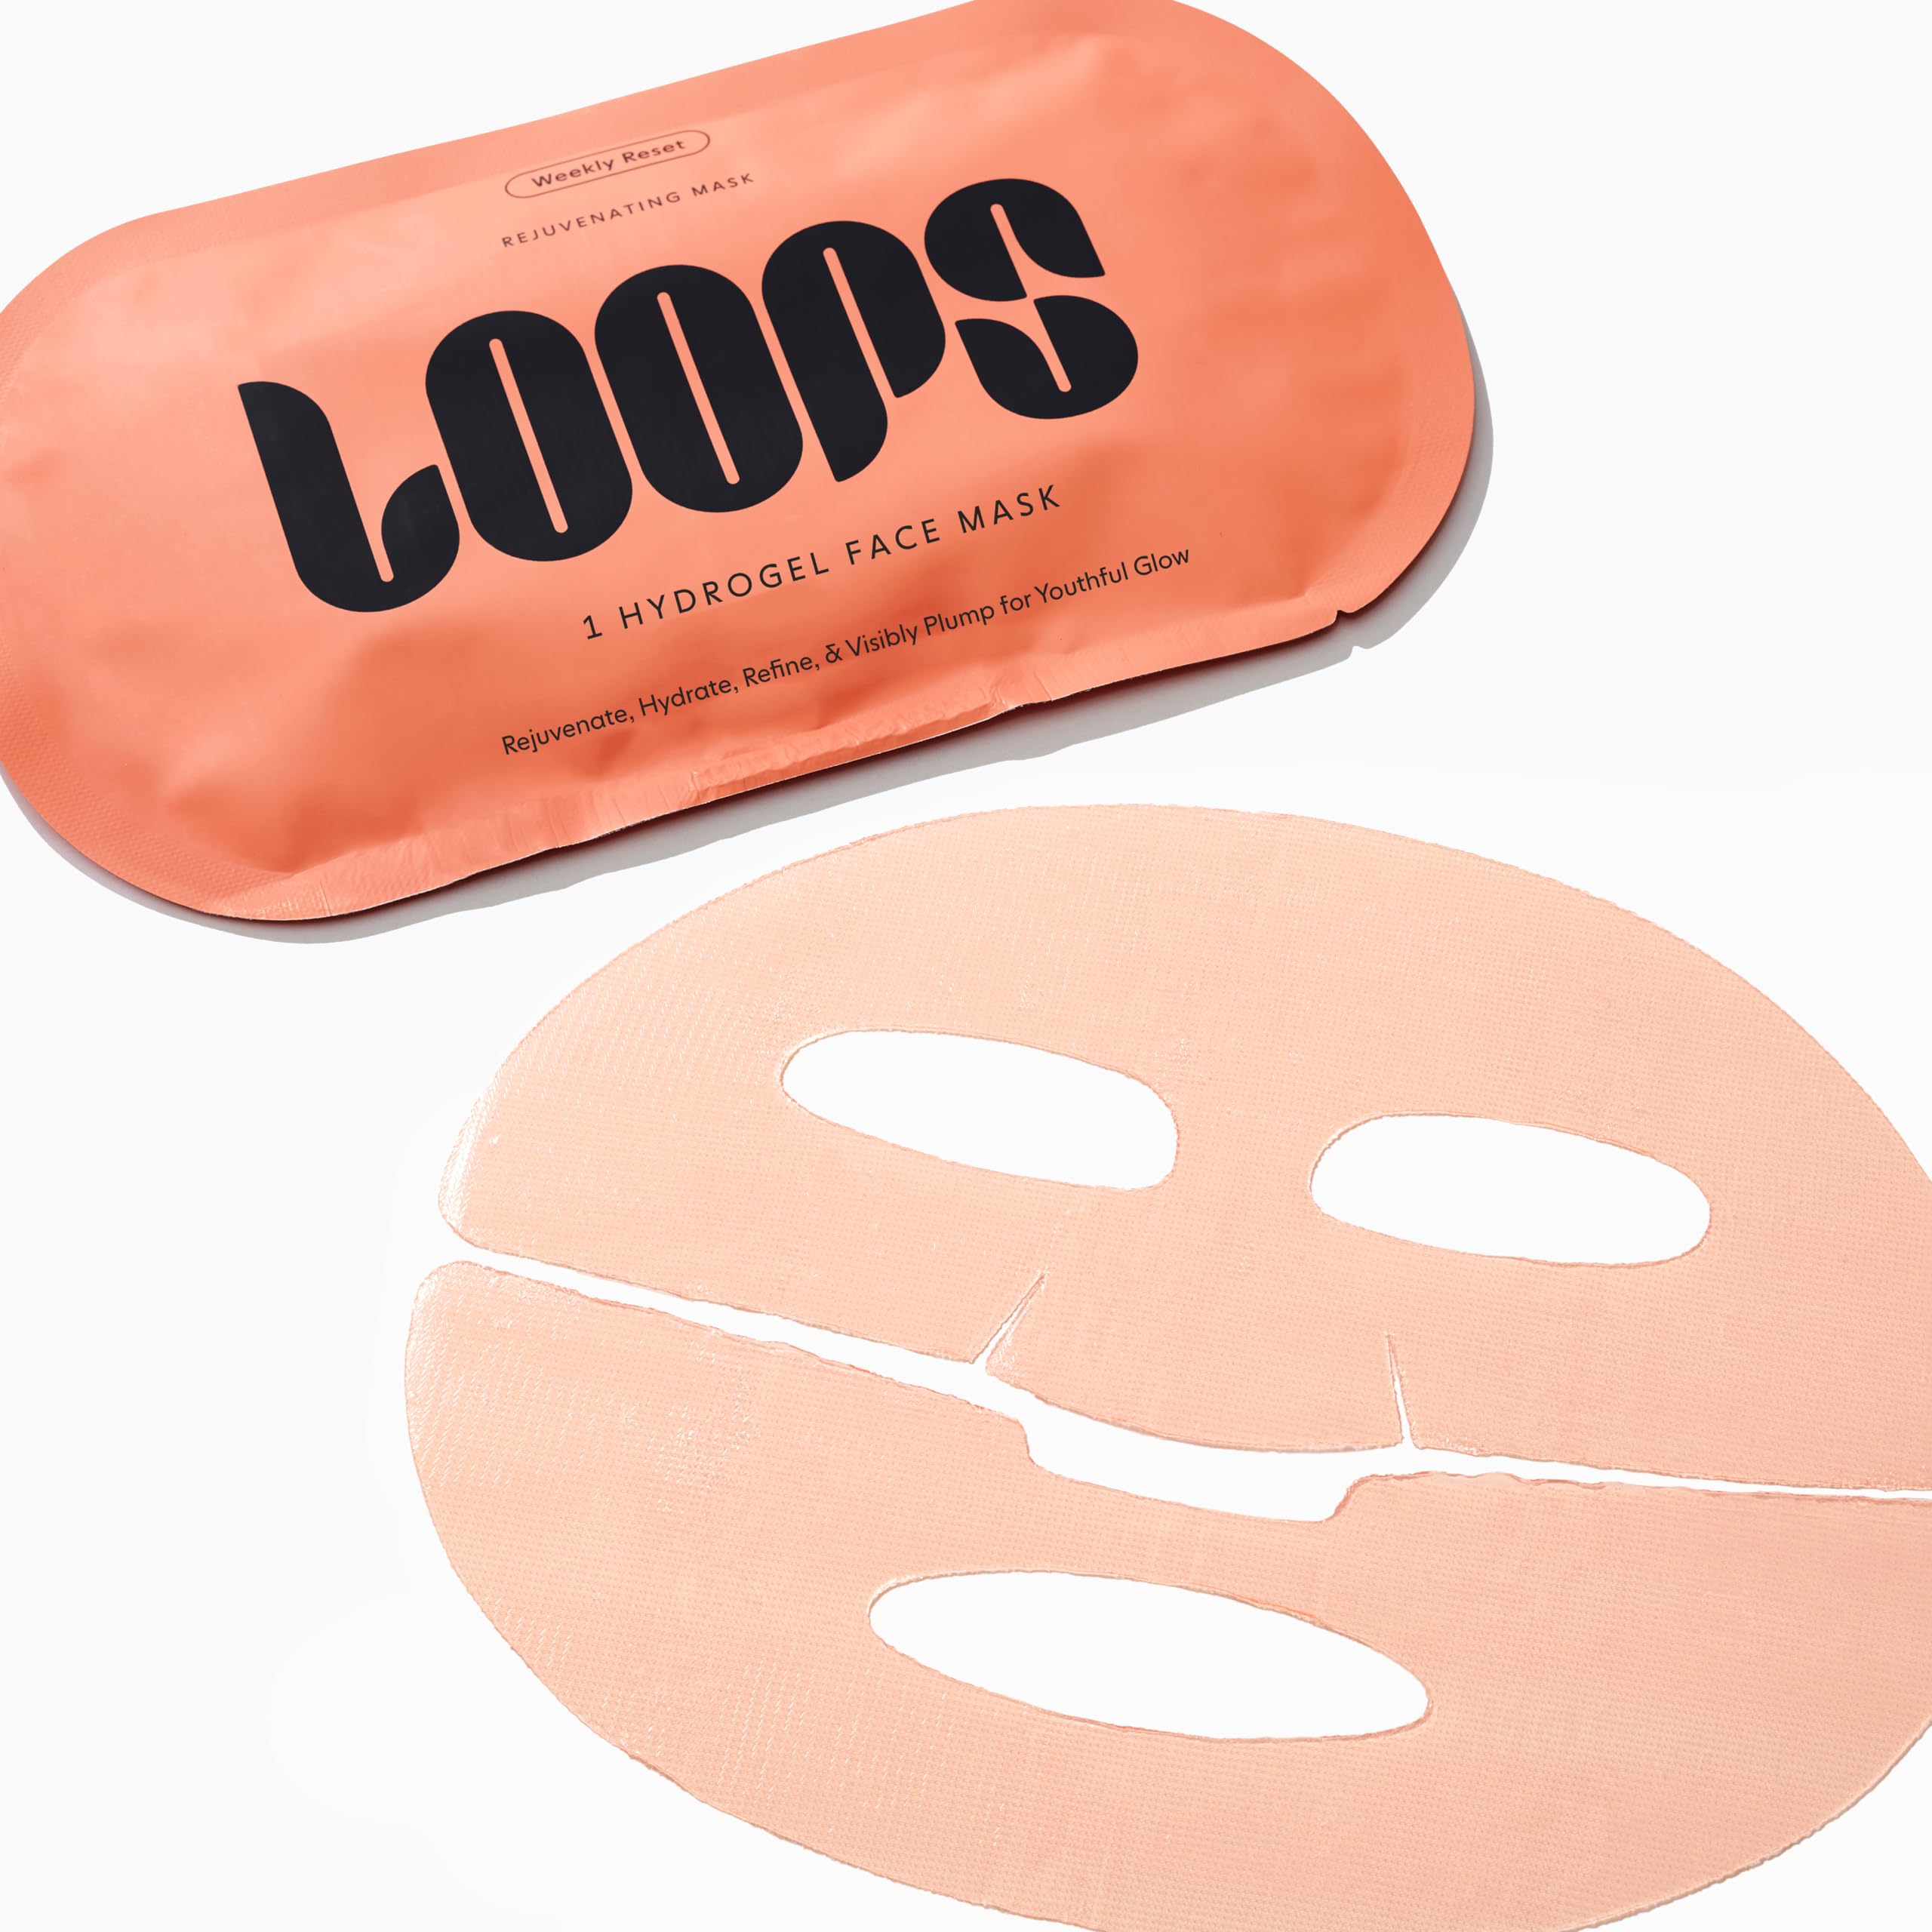 LOOPS WEEKLY RESET - Rejuvenating Hydrogel Face Mask Kit - Rejuvenate, Hydrate, Refine and Visibly Plump for Youthful Glow - Super Moisturizing and Pore Refining - Reduces Signs of Puffiness - 5 Pc